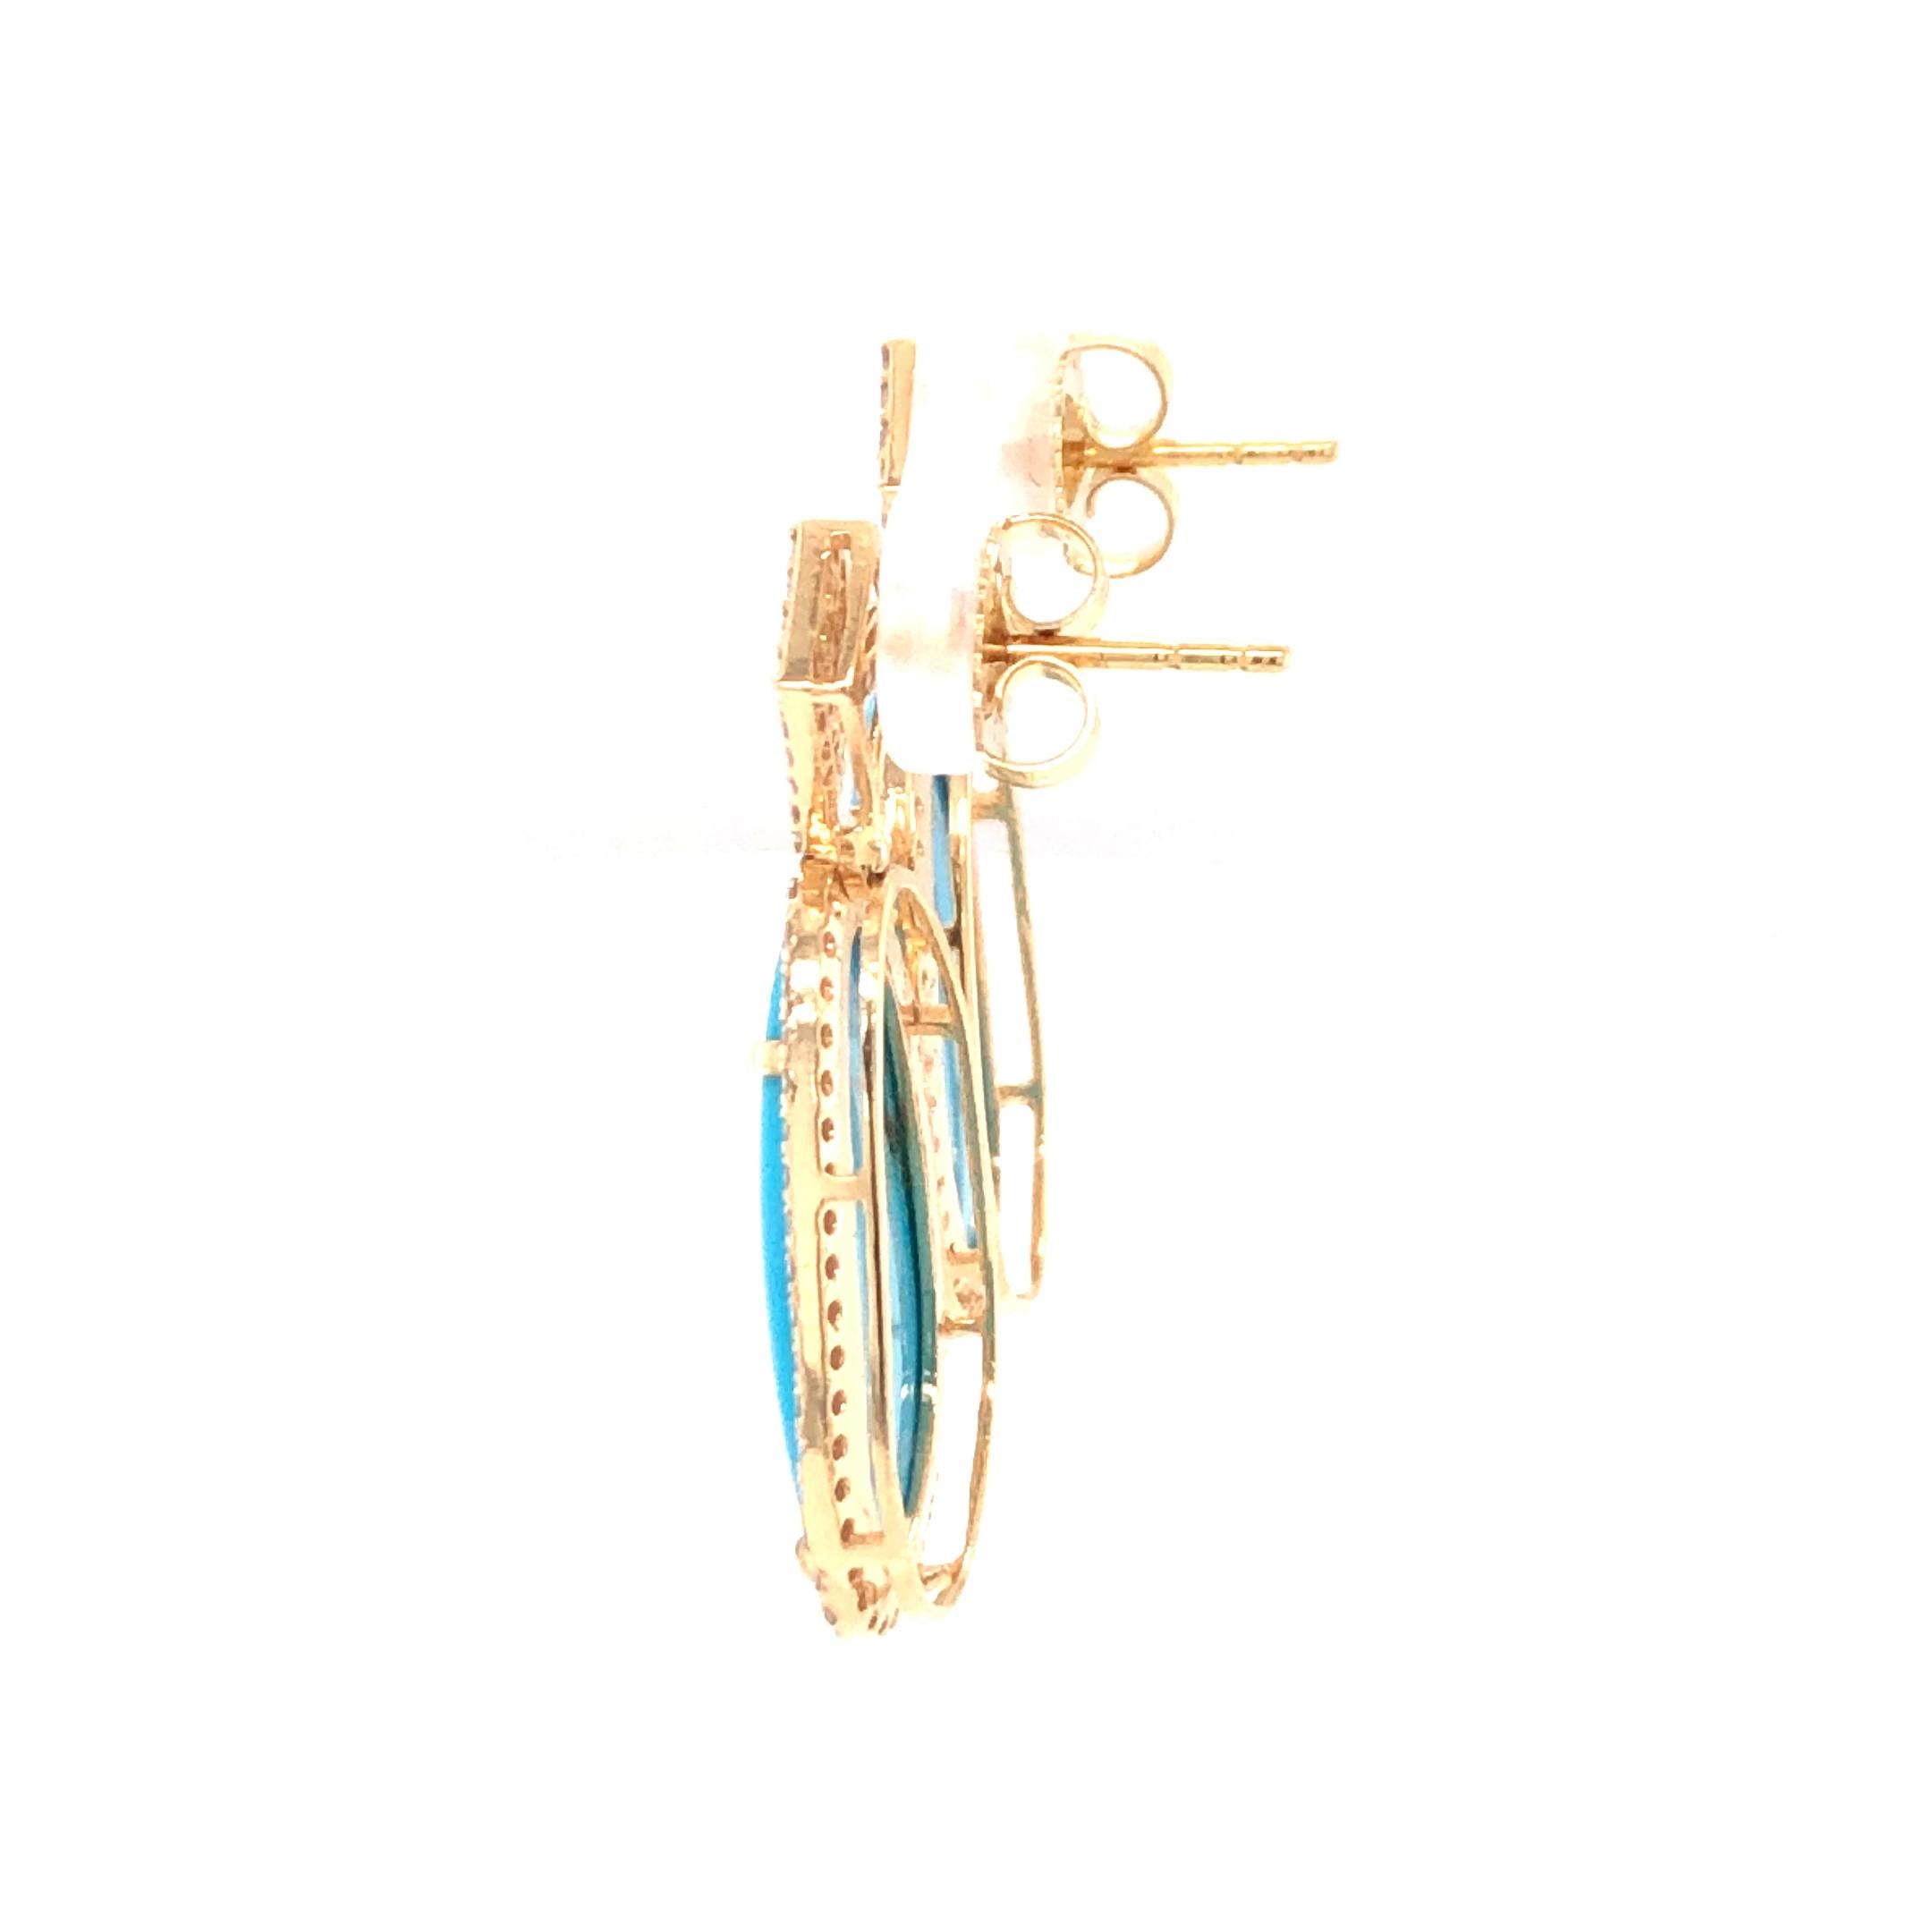 Turquoise 10.25ct and Diamond 0.96ctw 18K Yellow Gold Earring